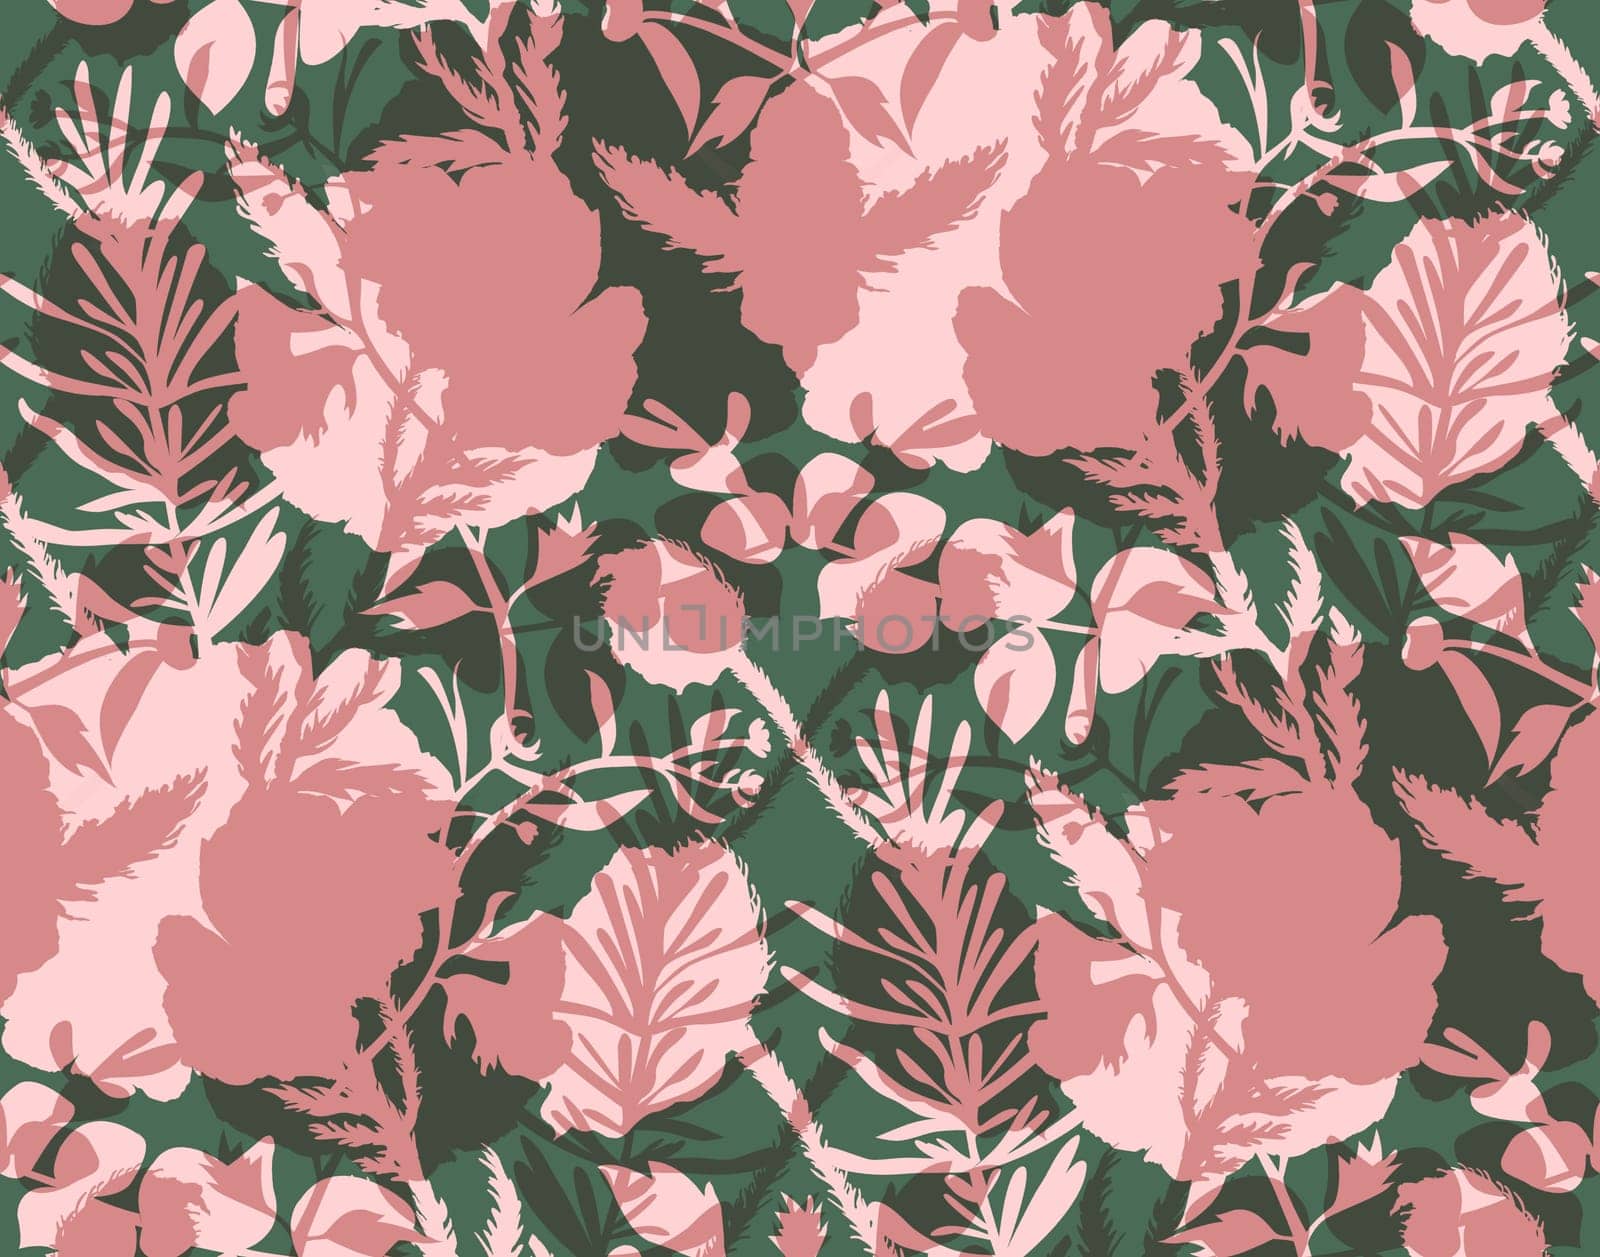 Seamless pattern with silhouettes of flowers in green and red shades. Modern botanical mix of silhouettes for summer textile and surface design